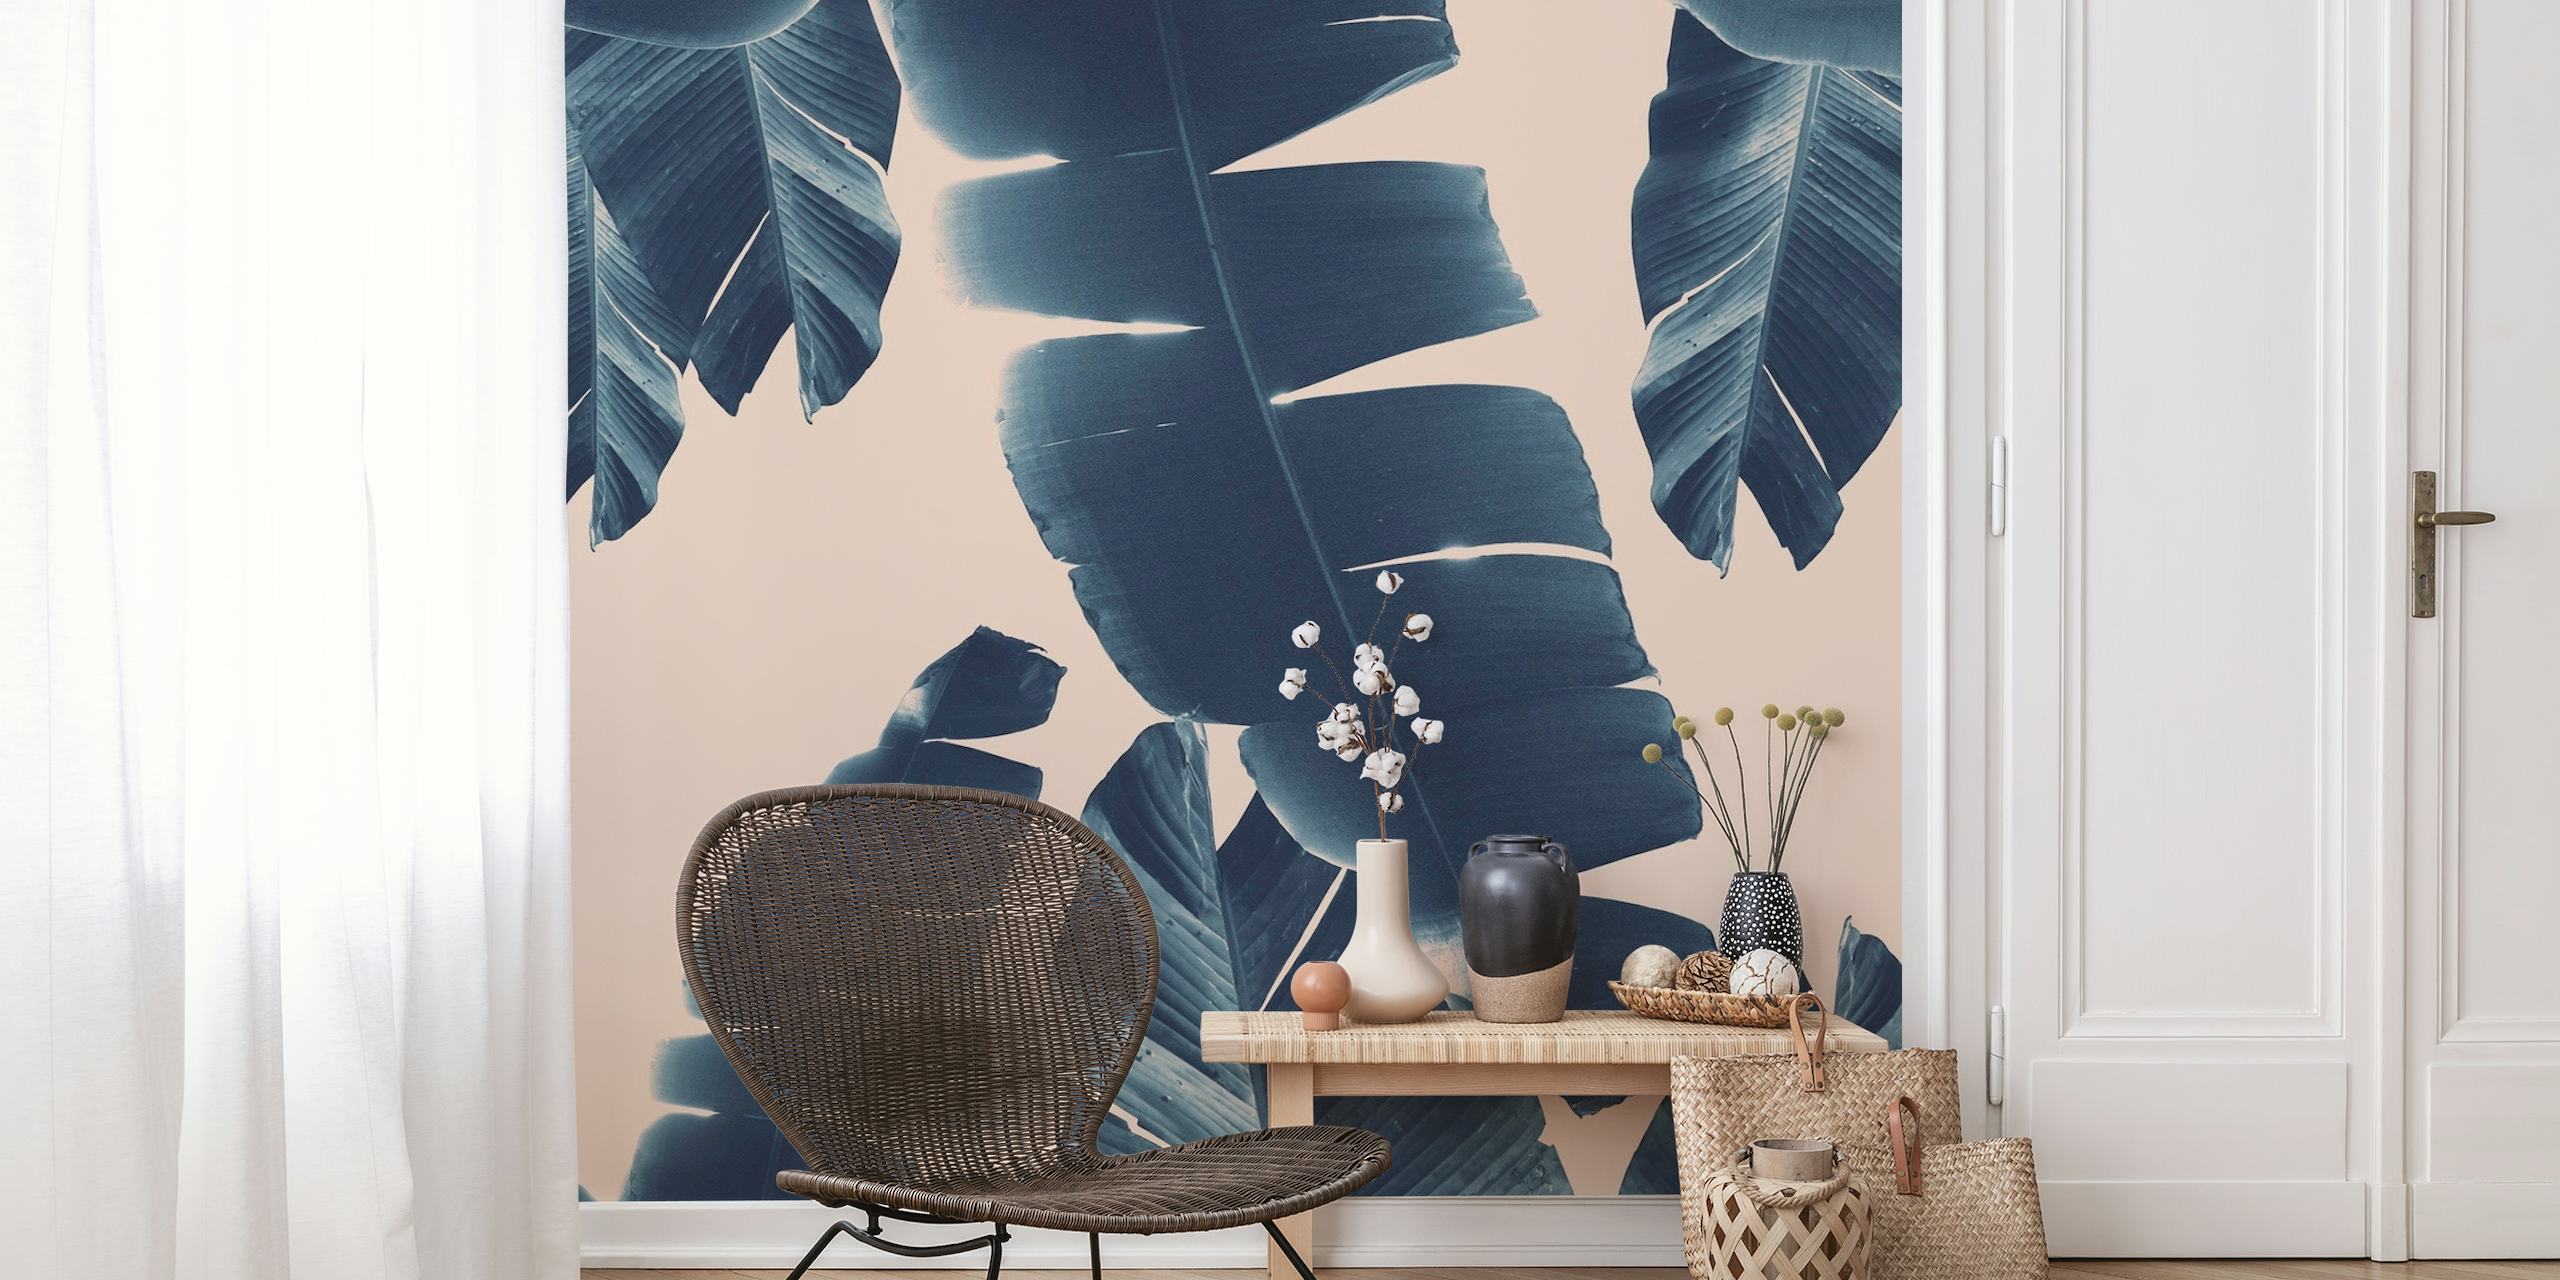 Banana Leaves wall mural with a summer vibe in a monochrome palette